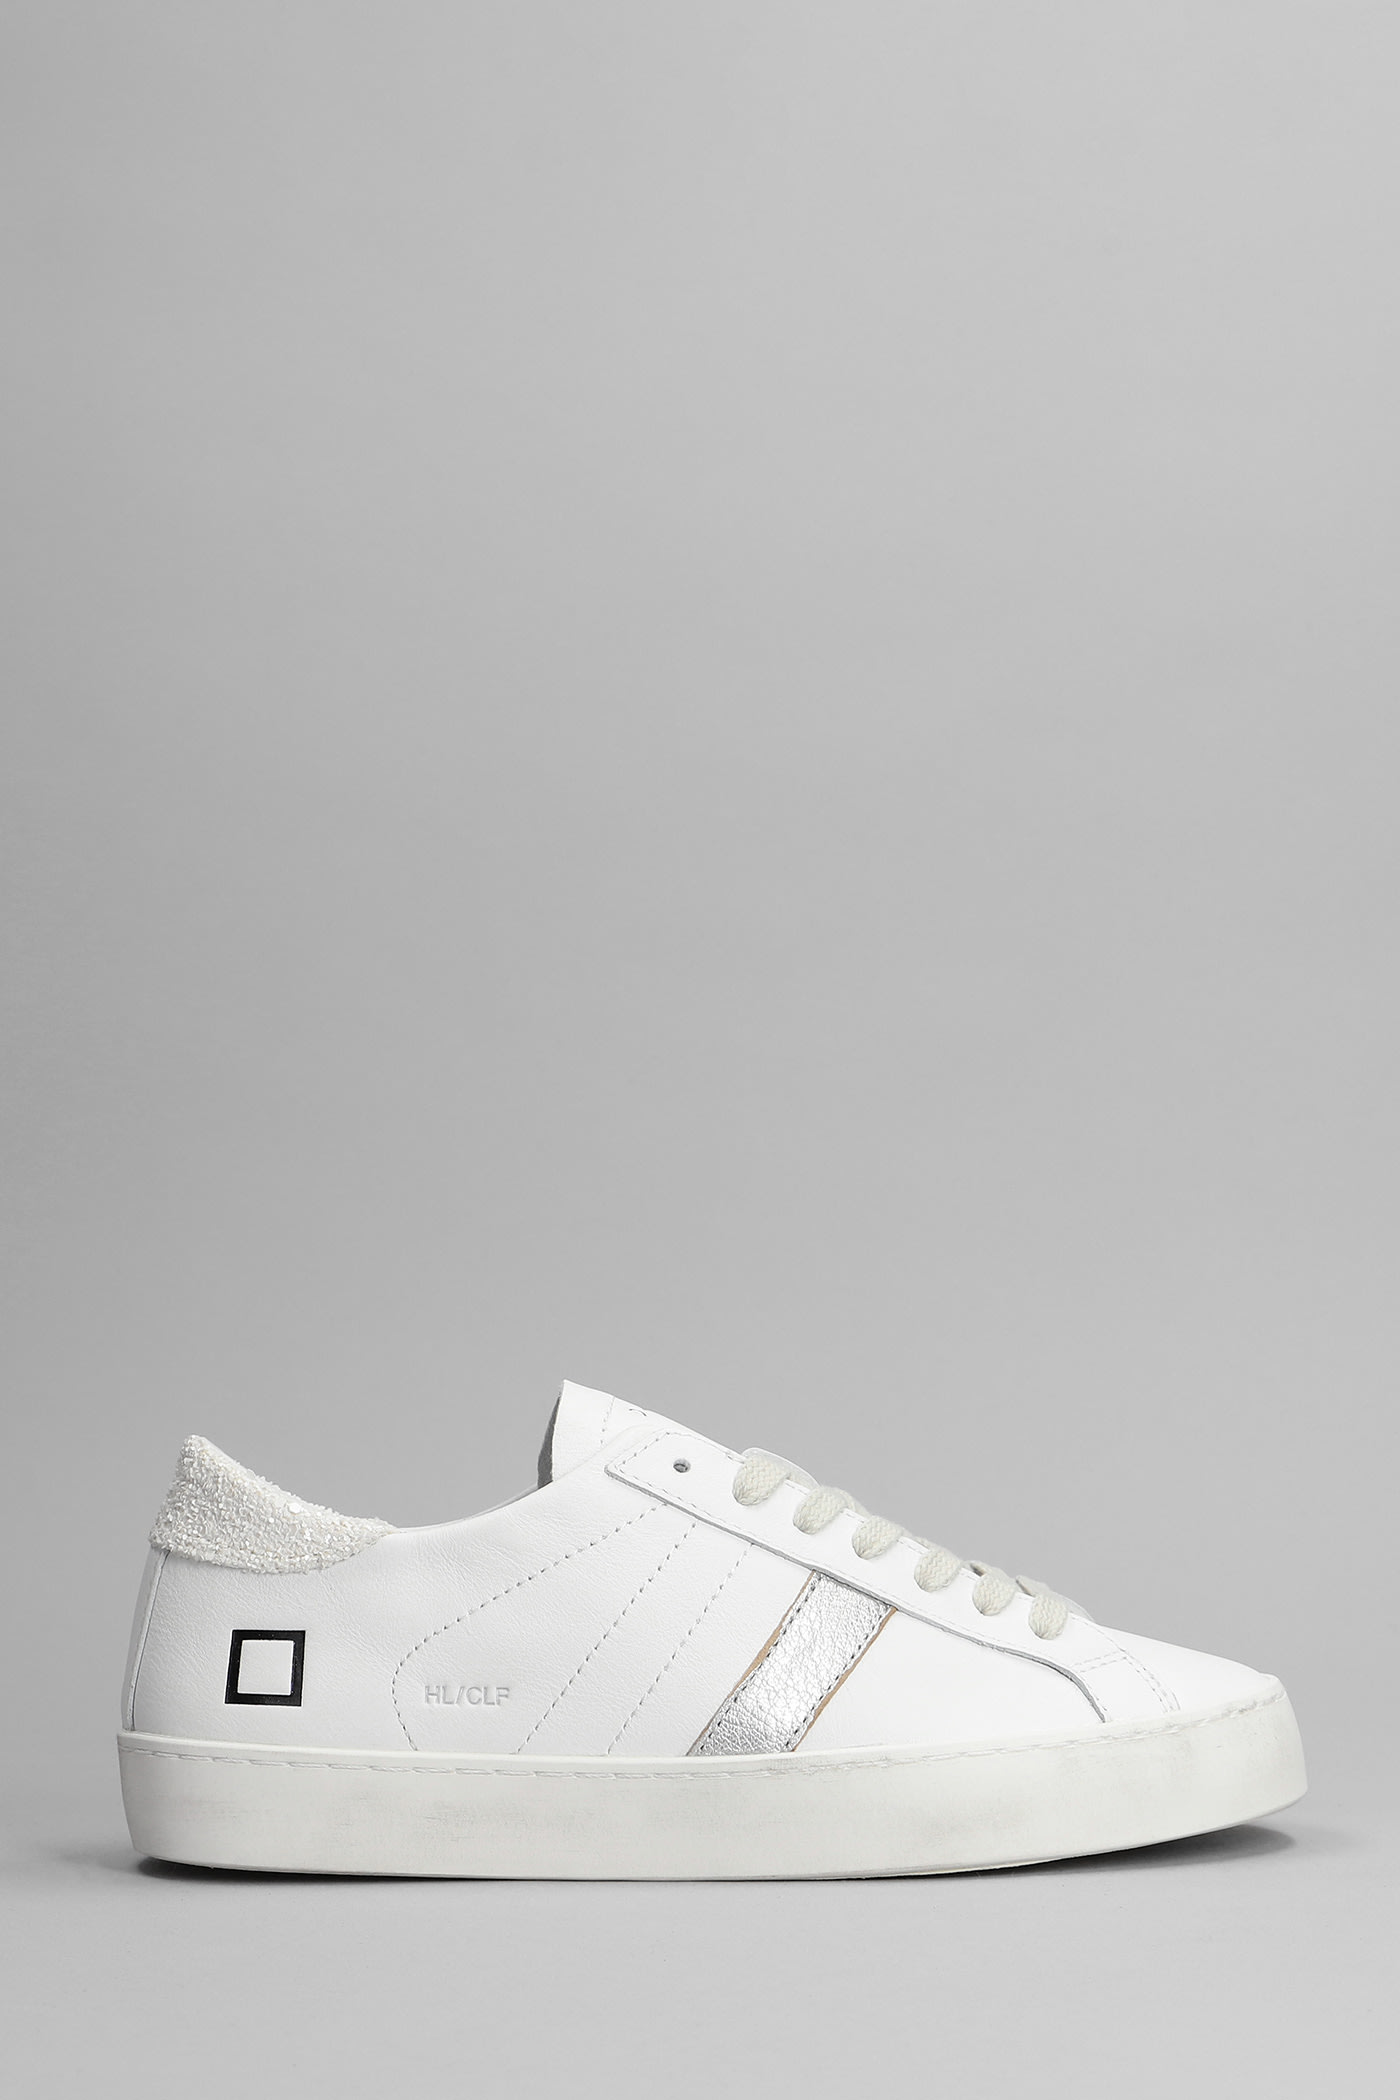 D.A.T.E. Hill Low Sneakers In White Leather D.A.T.E.